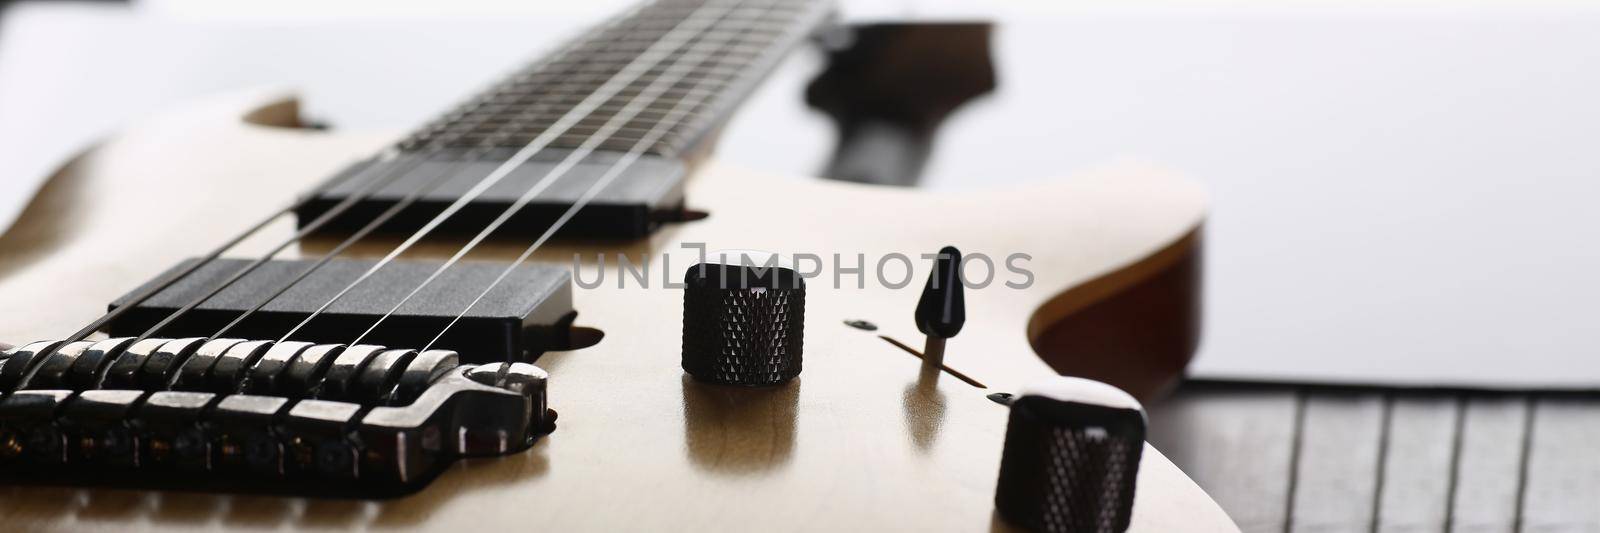 Close-up of classic shape wooden electric guitar with rosewood neck. Six stringed learning lesson musician instrument, education, hobby, leisure concept